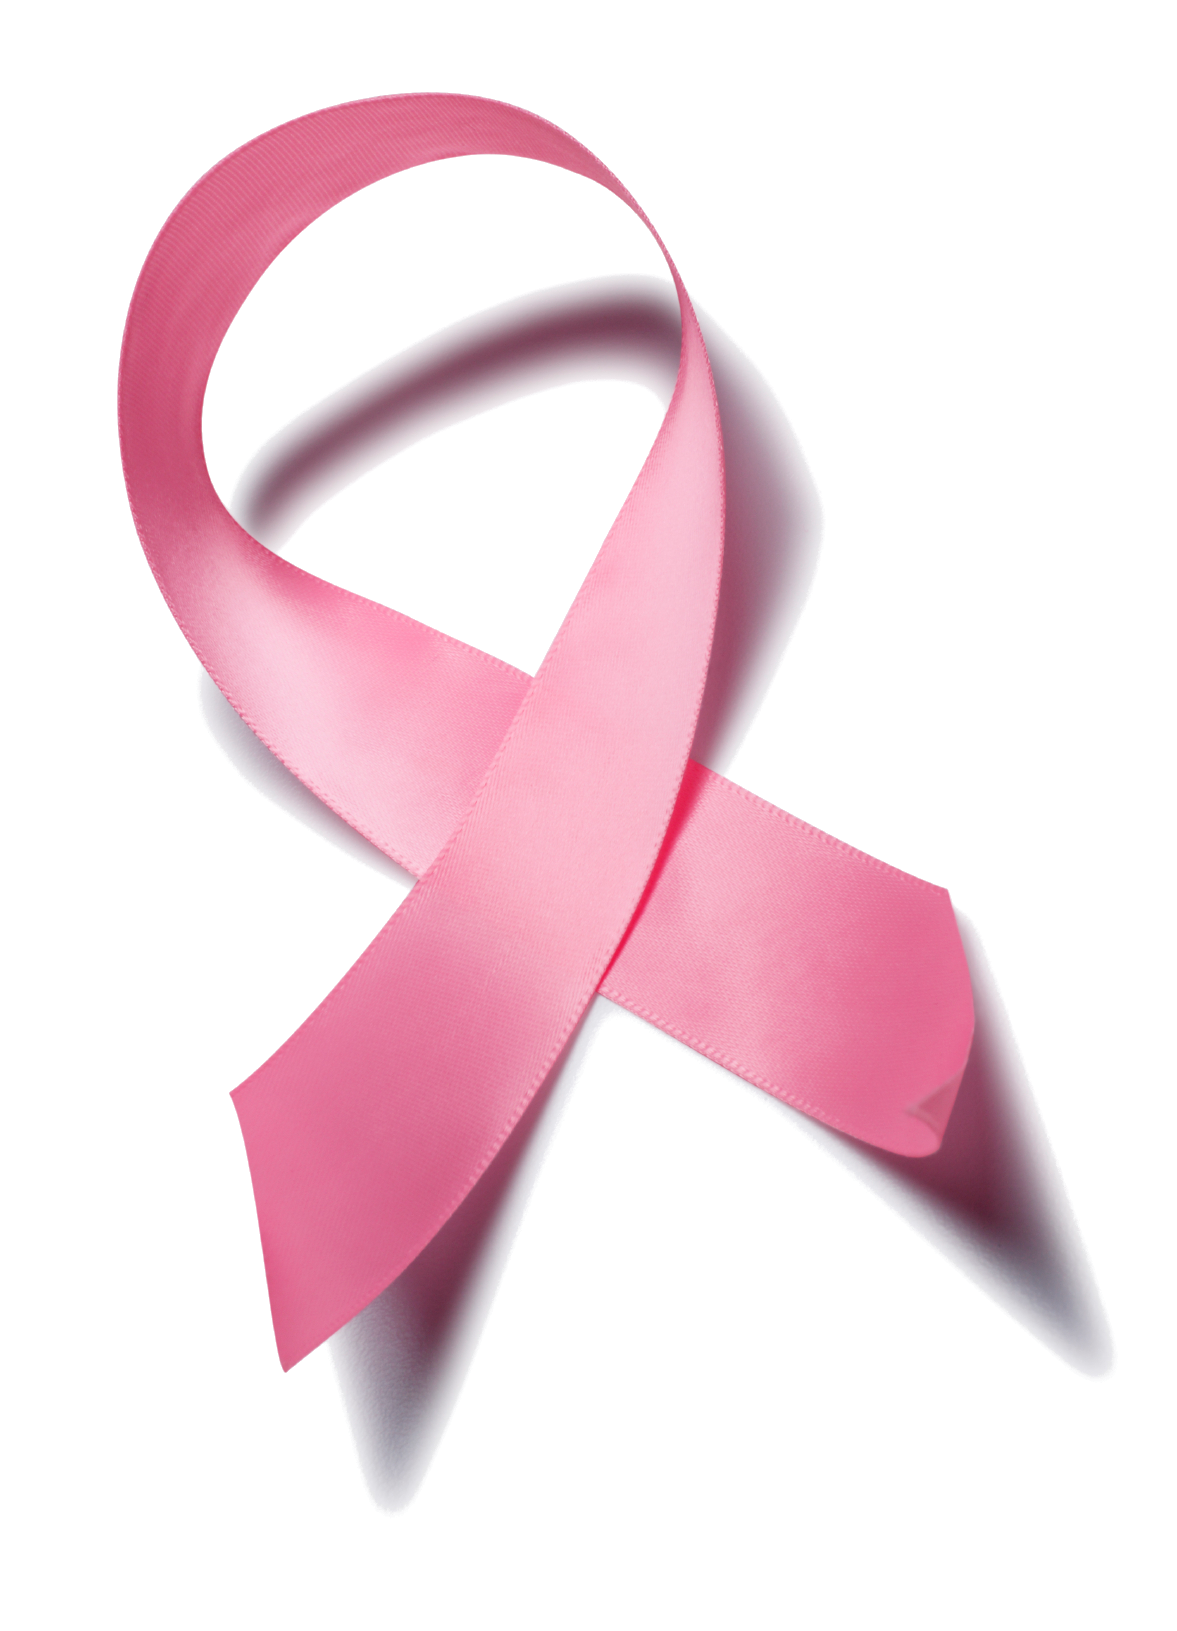 The Pink Ribbons of Breast Cancer Awareness